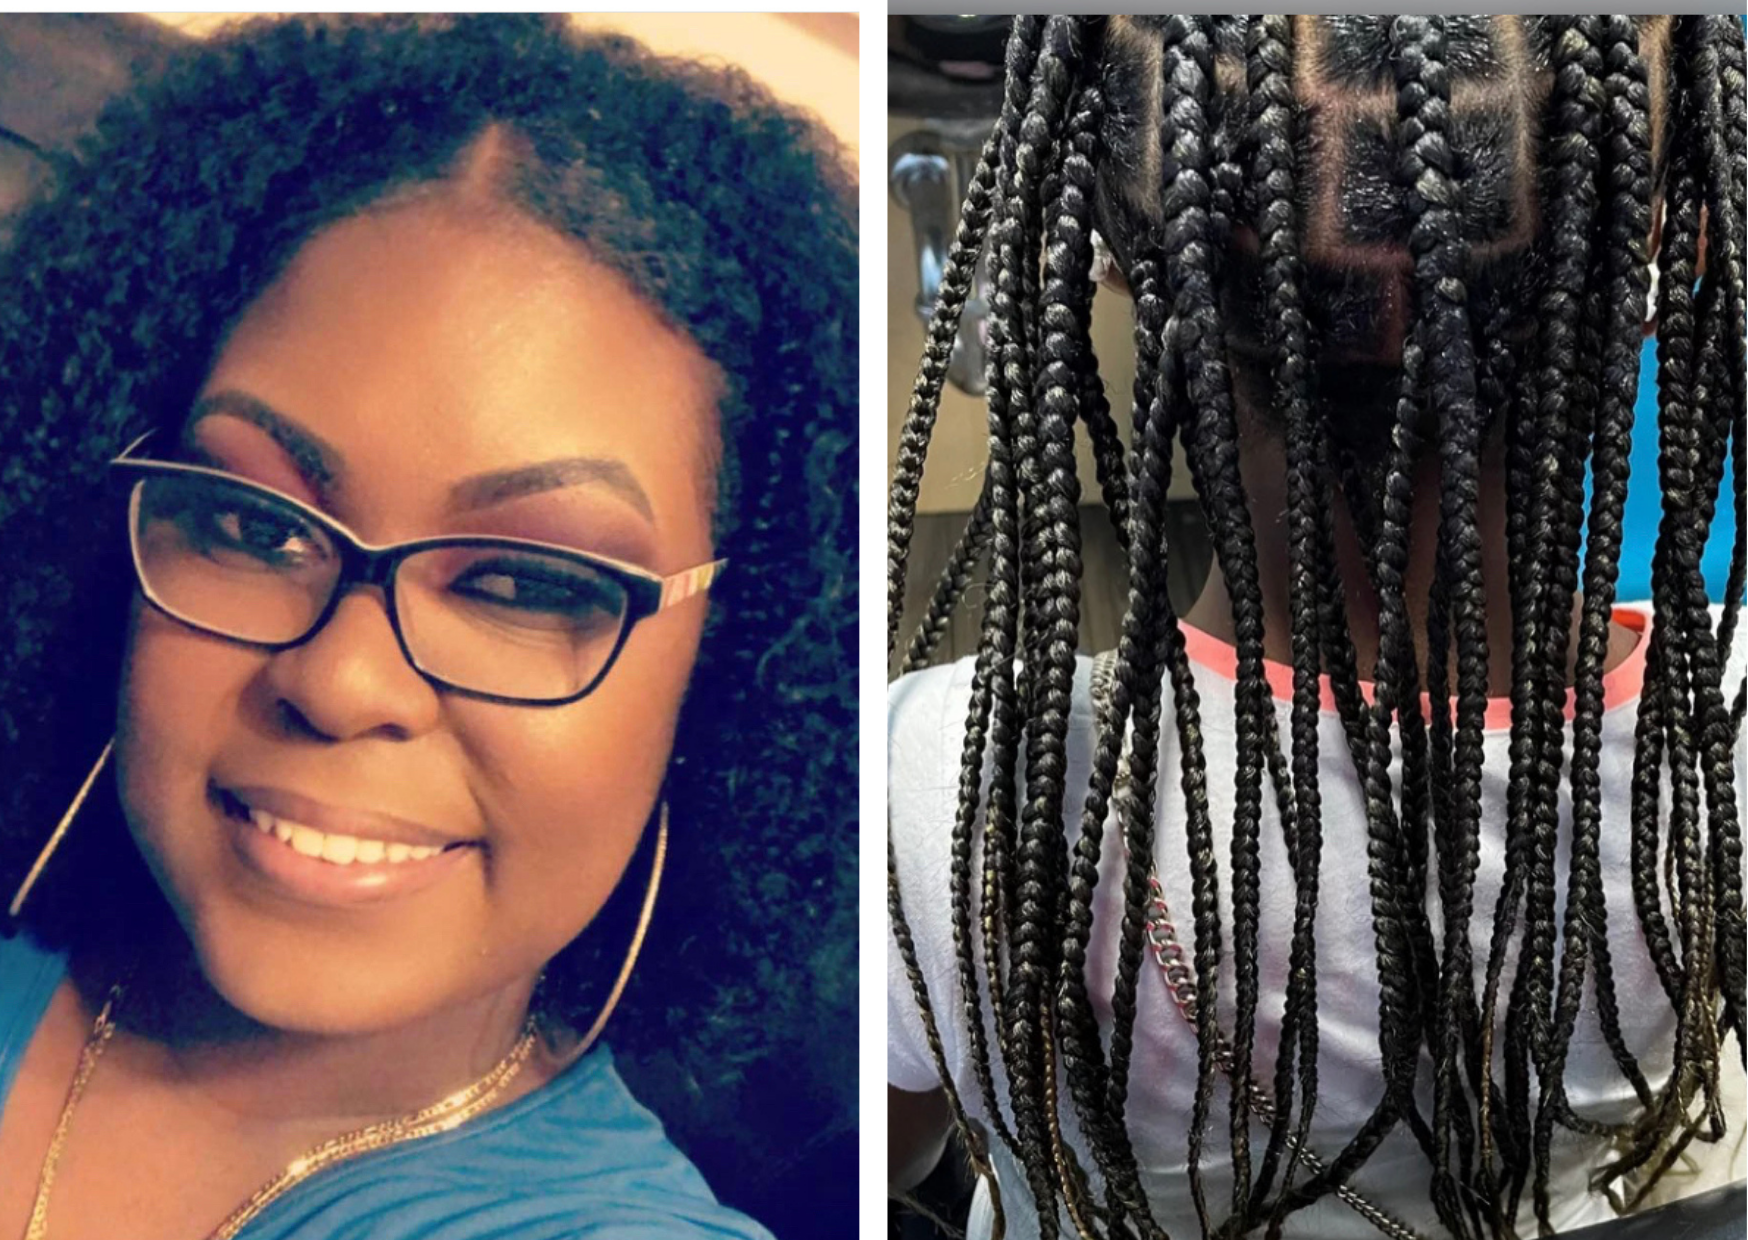 Nashville Mom Braids Kids' Hair for Free to Boost Confidence